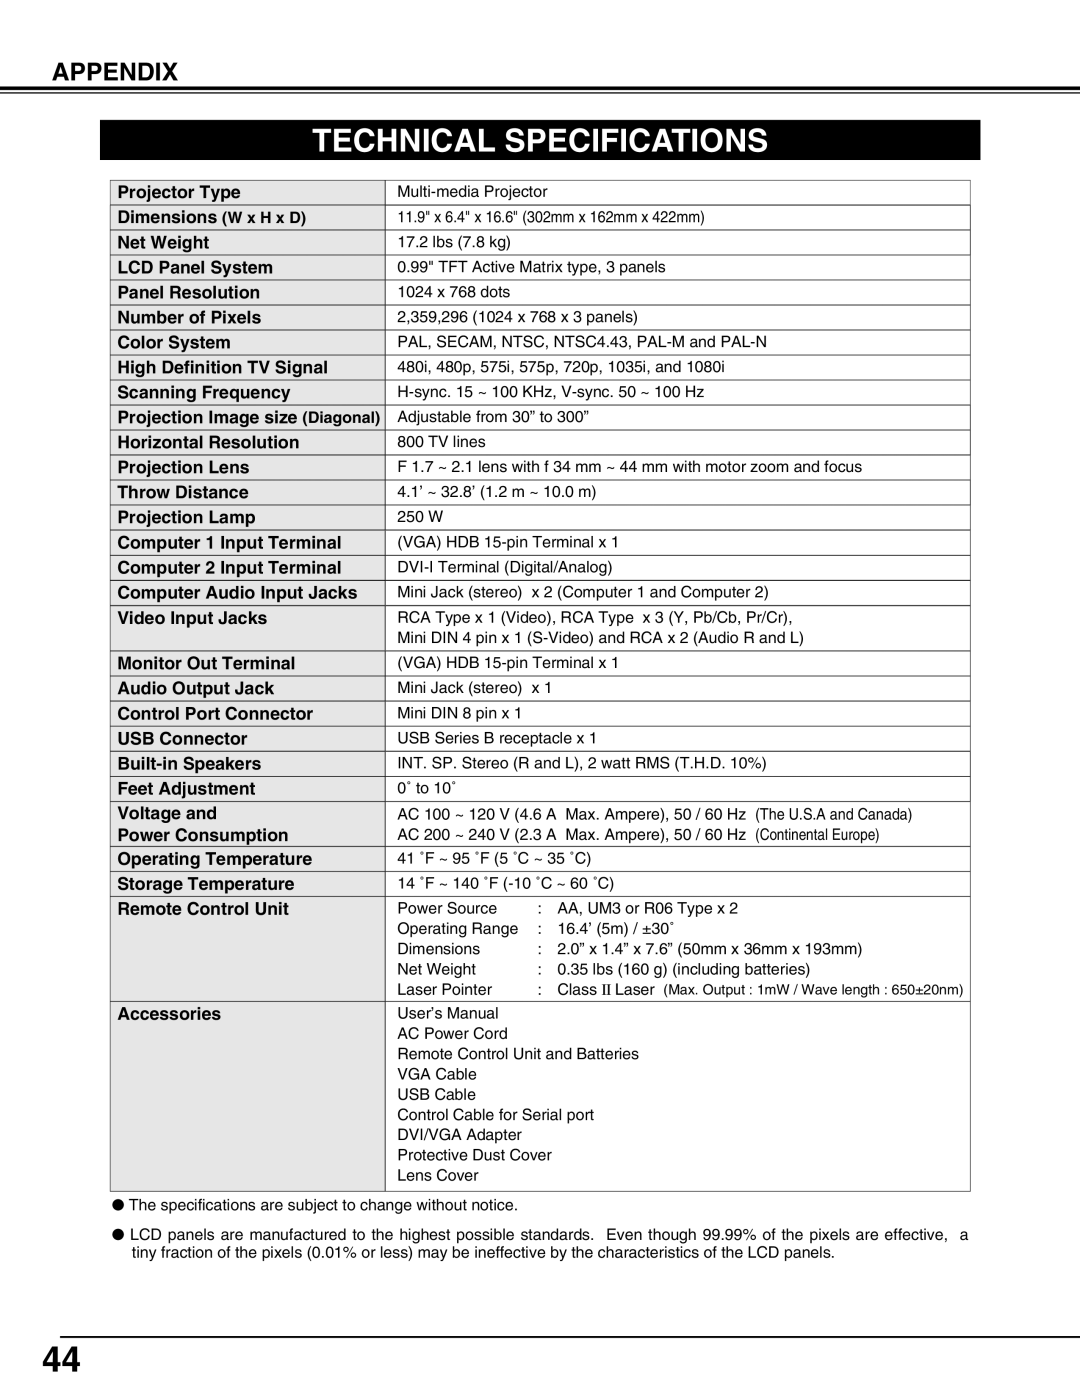 Christie Digital Systems 38-VIV207-01 Technical Specifications, Appendix, Projector Type, Dimensions W x H x D, Net Weight 